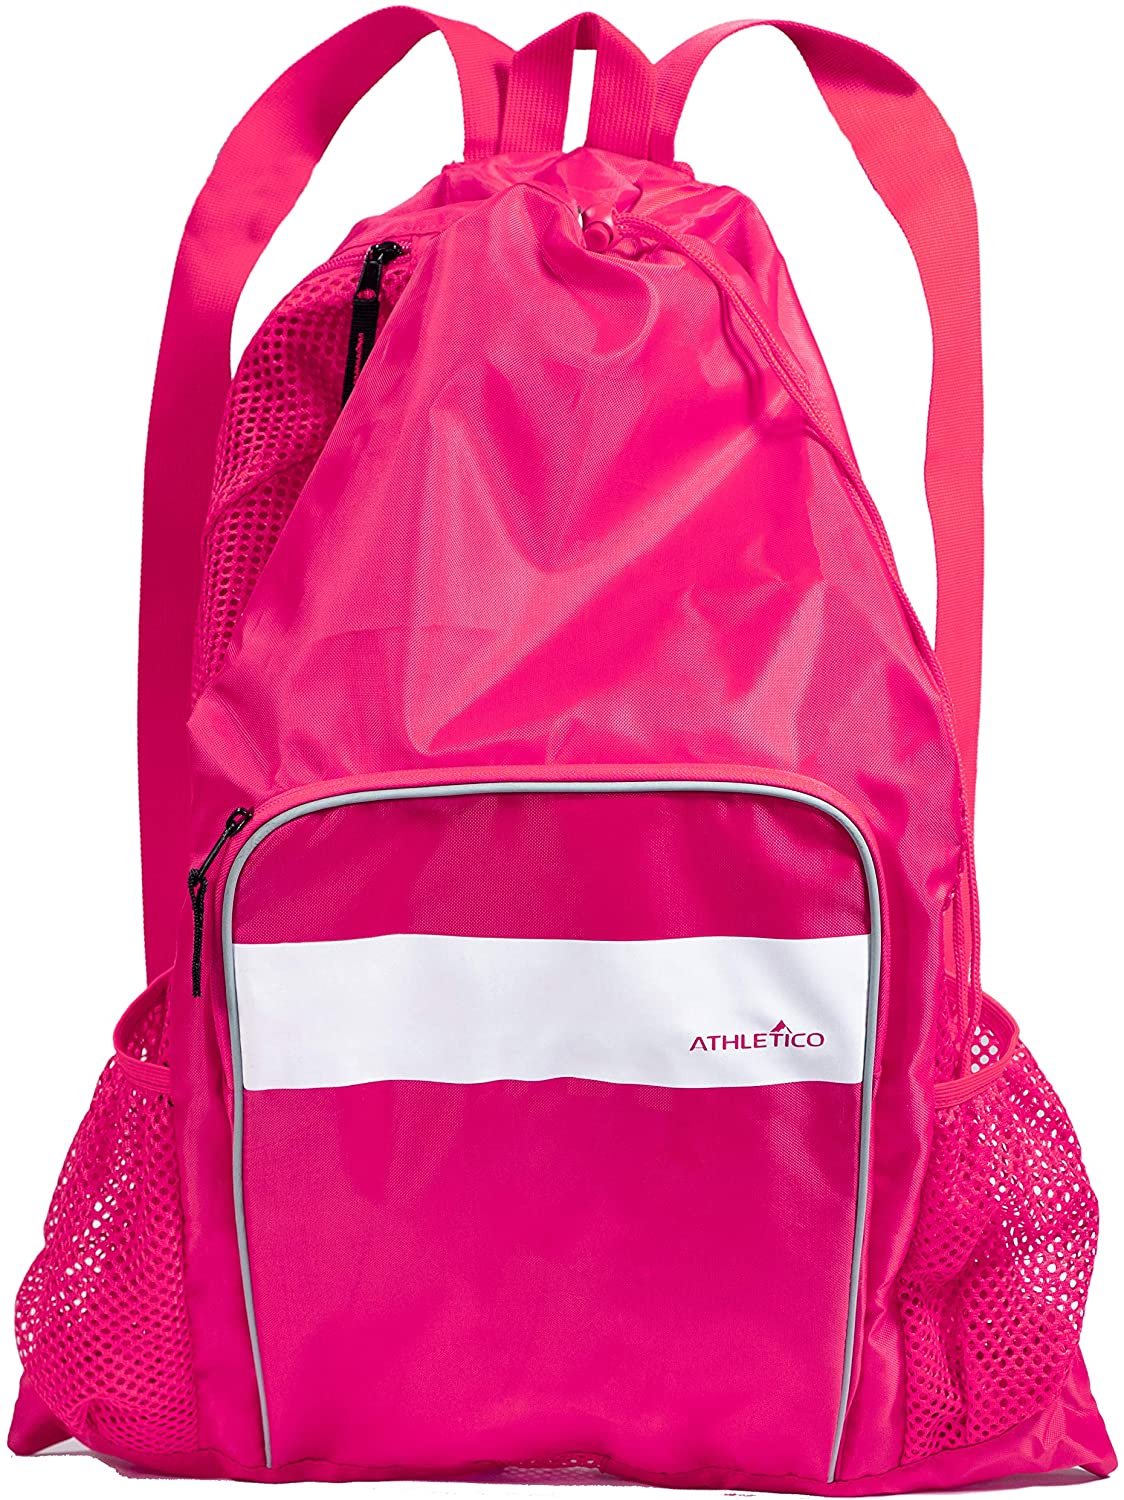 Athletico Mid Size Mesh Swim Bag - Pink, Wet & Dry Compartments, for Swimming, Beach & Camping - Free Shipping